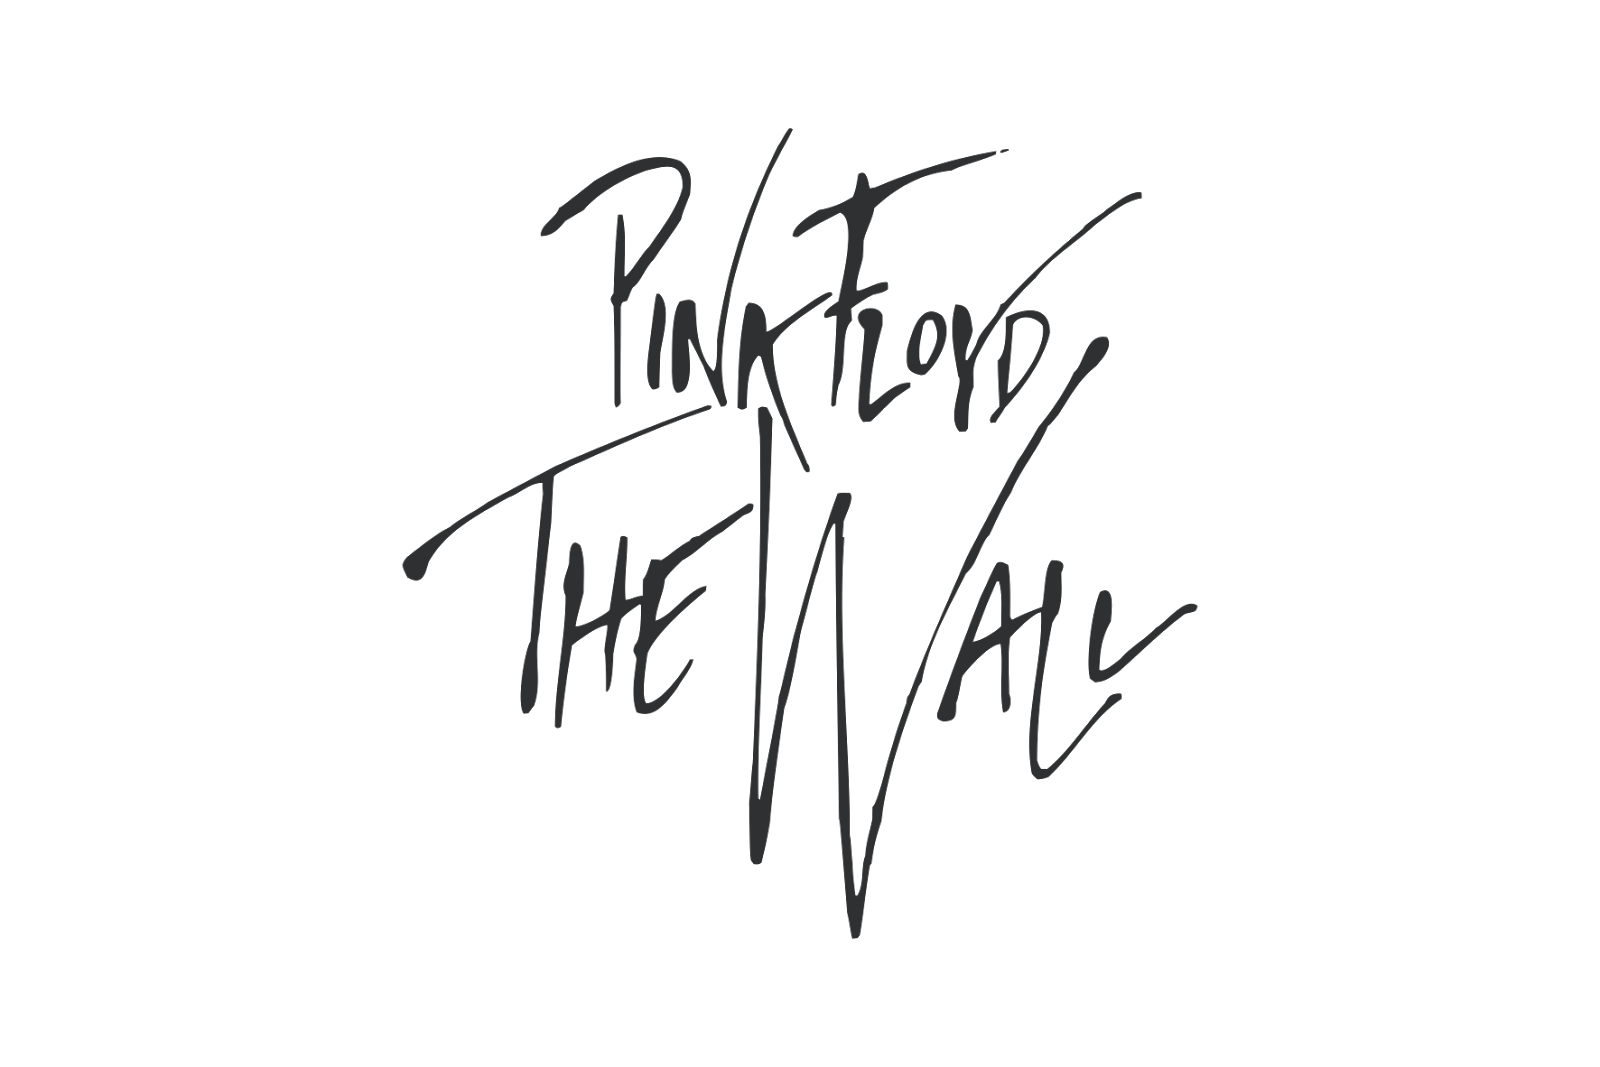 Great Title the Walls Logo - Pink Floyd Wall Logo cdr vector